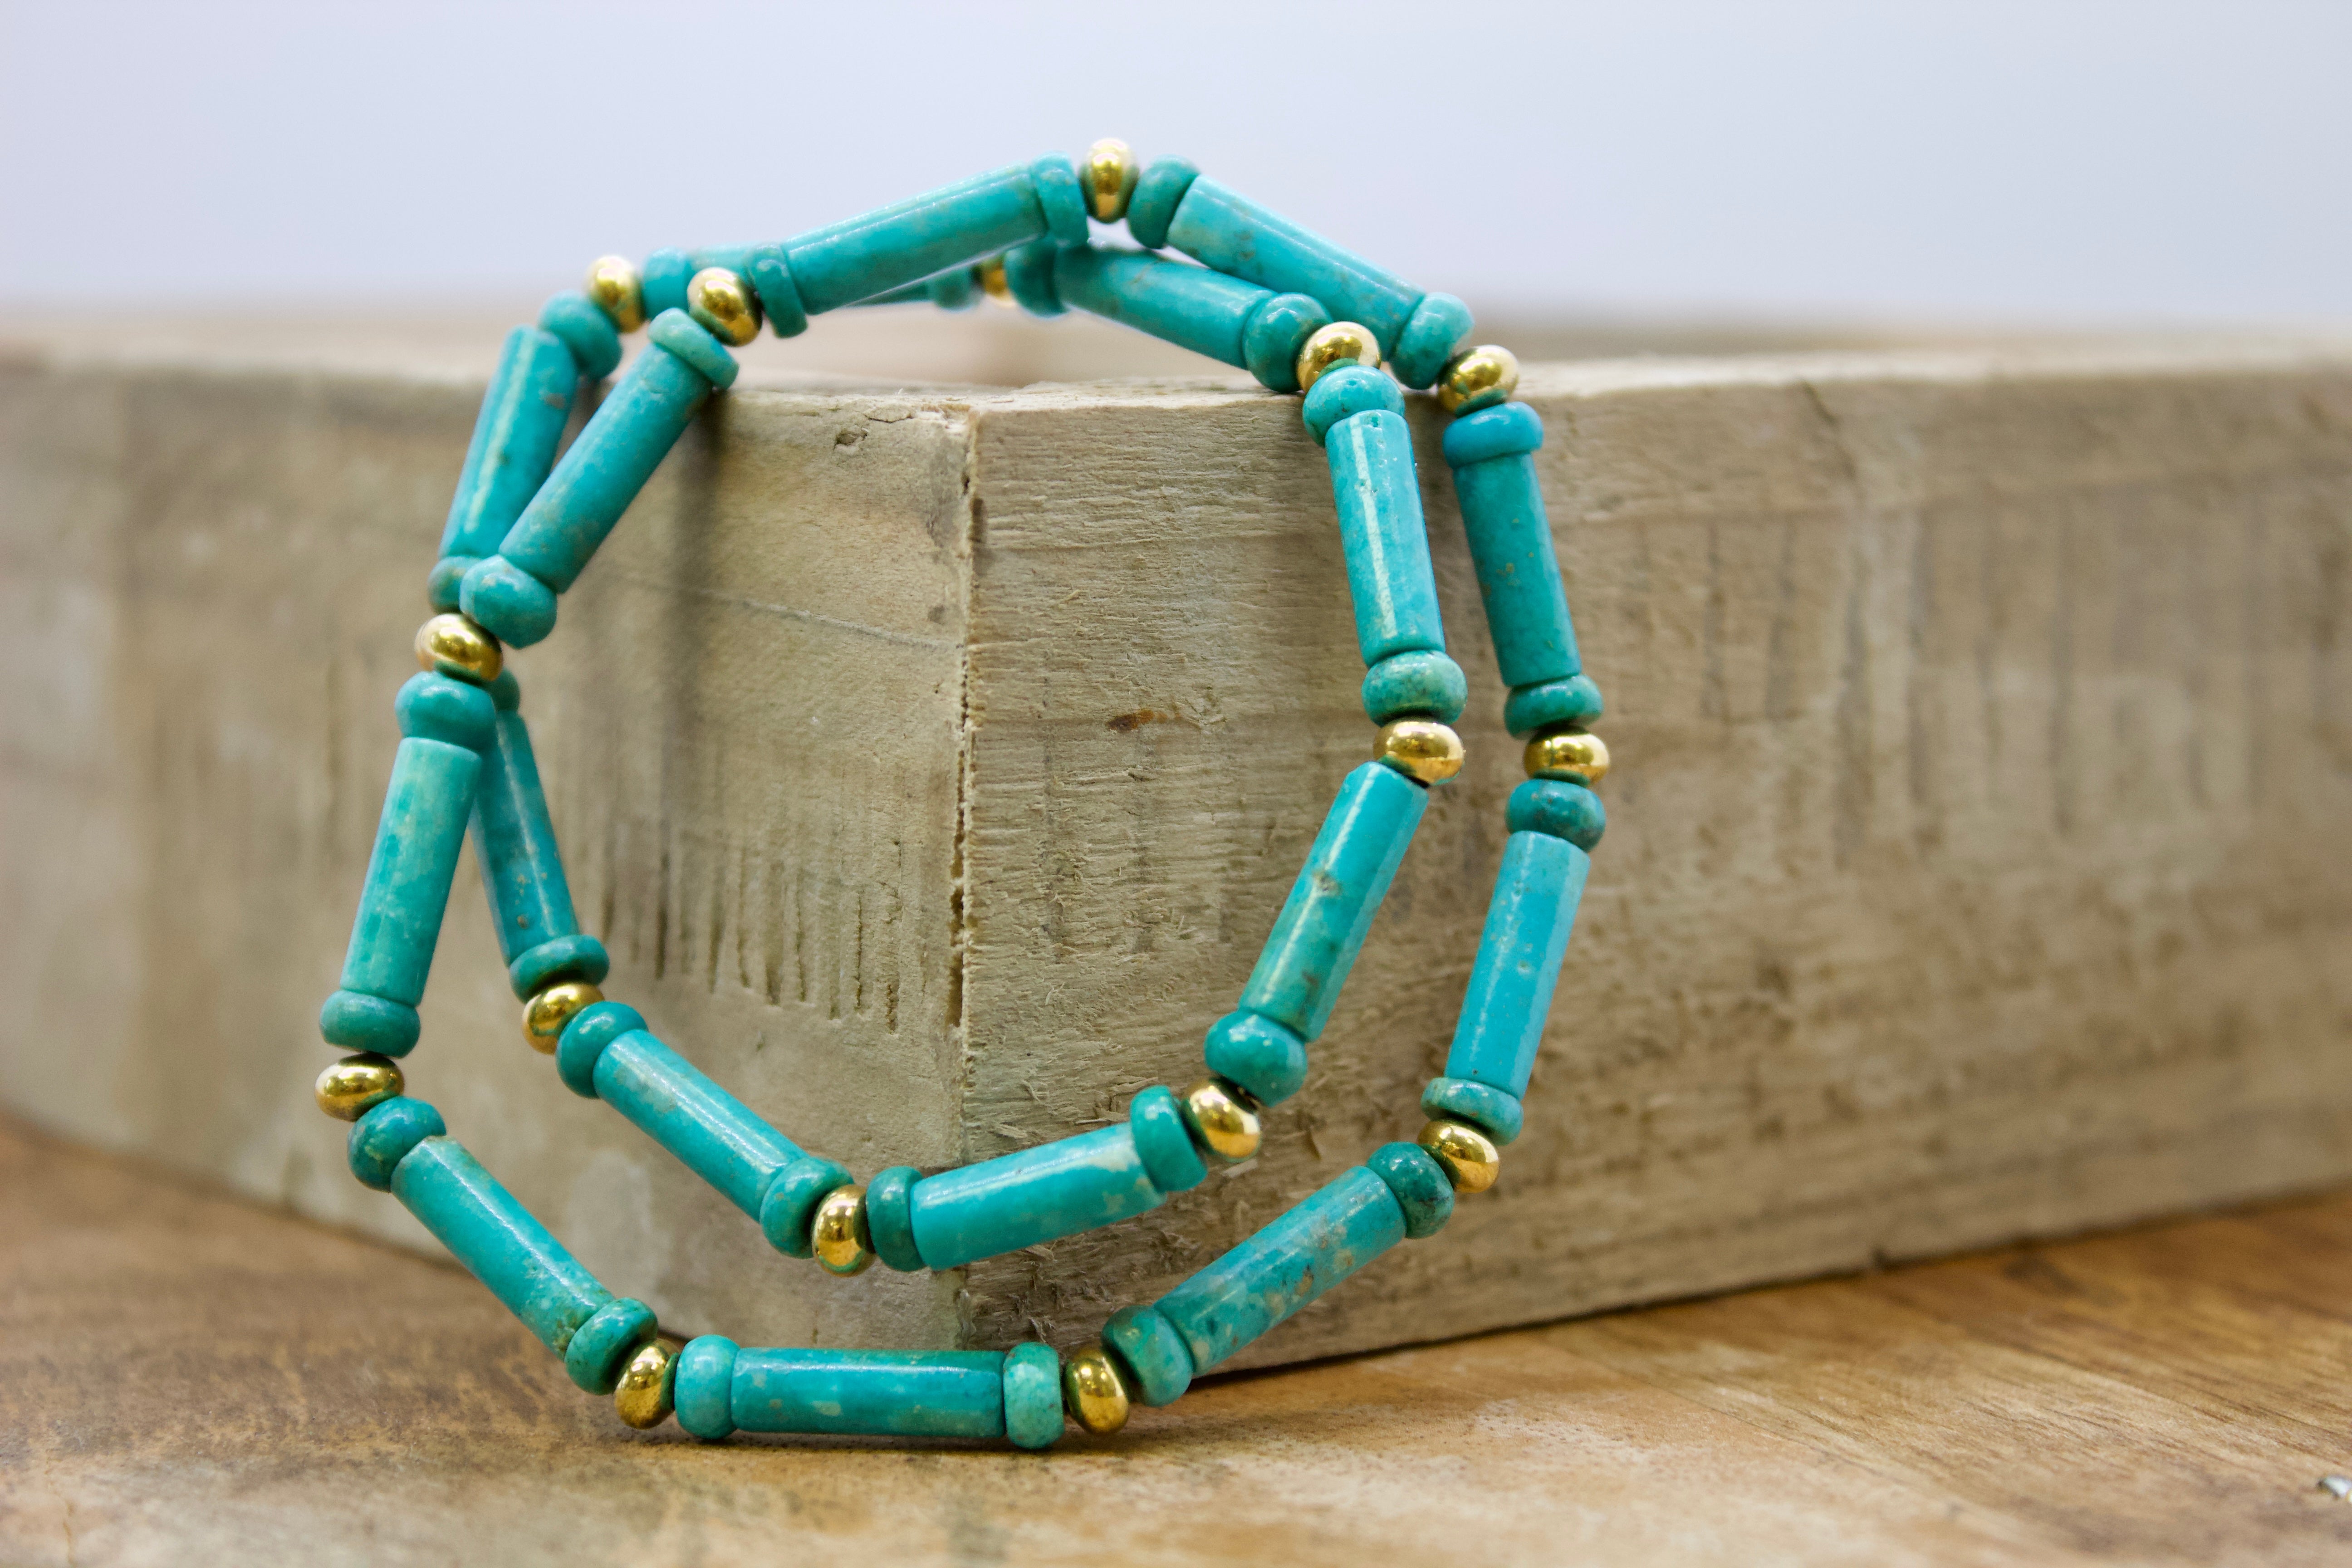  Turquoise beads, Southwestern-style, 14x5mm round tube with 5x2mm rondelle